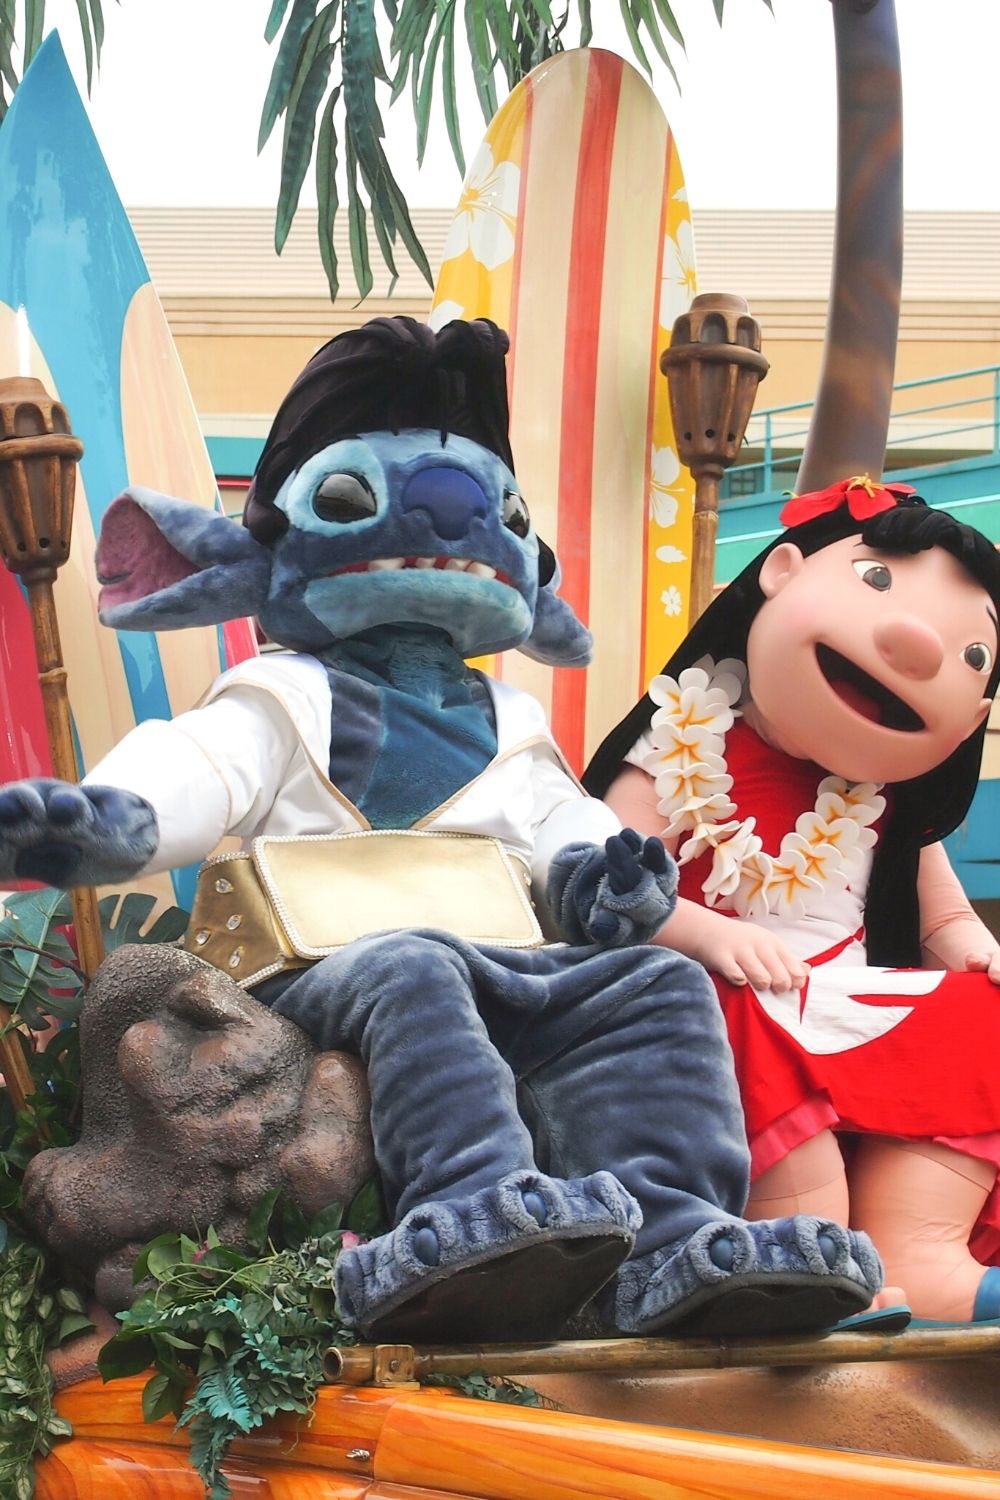 A Disney parade float features Lilo and Stitch characters, with Stitch in an Elvis suit